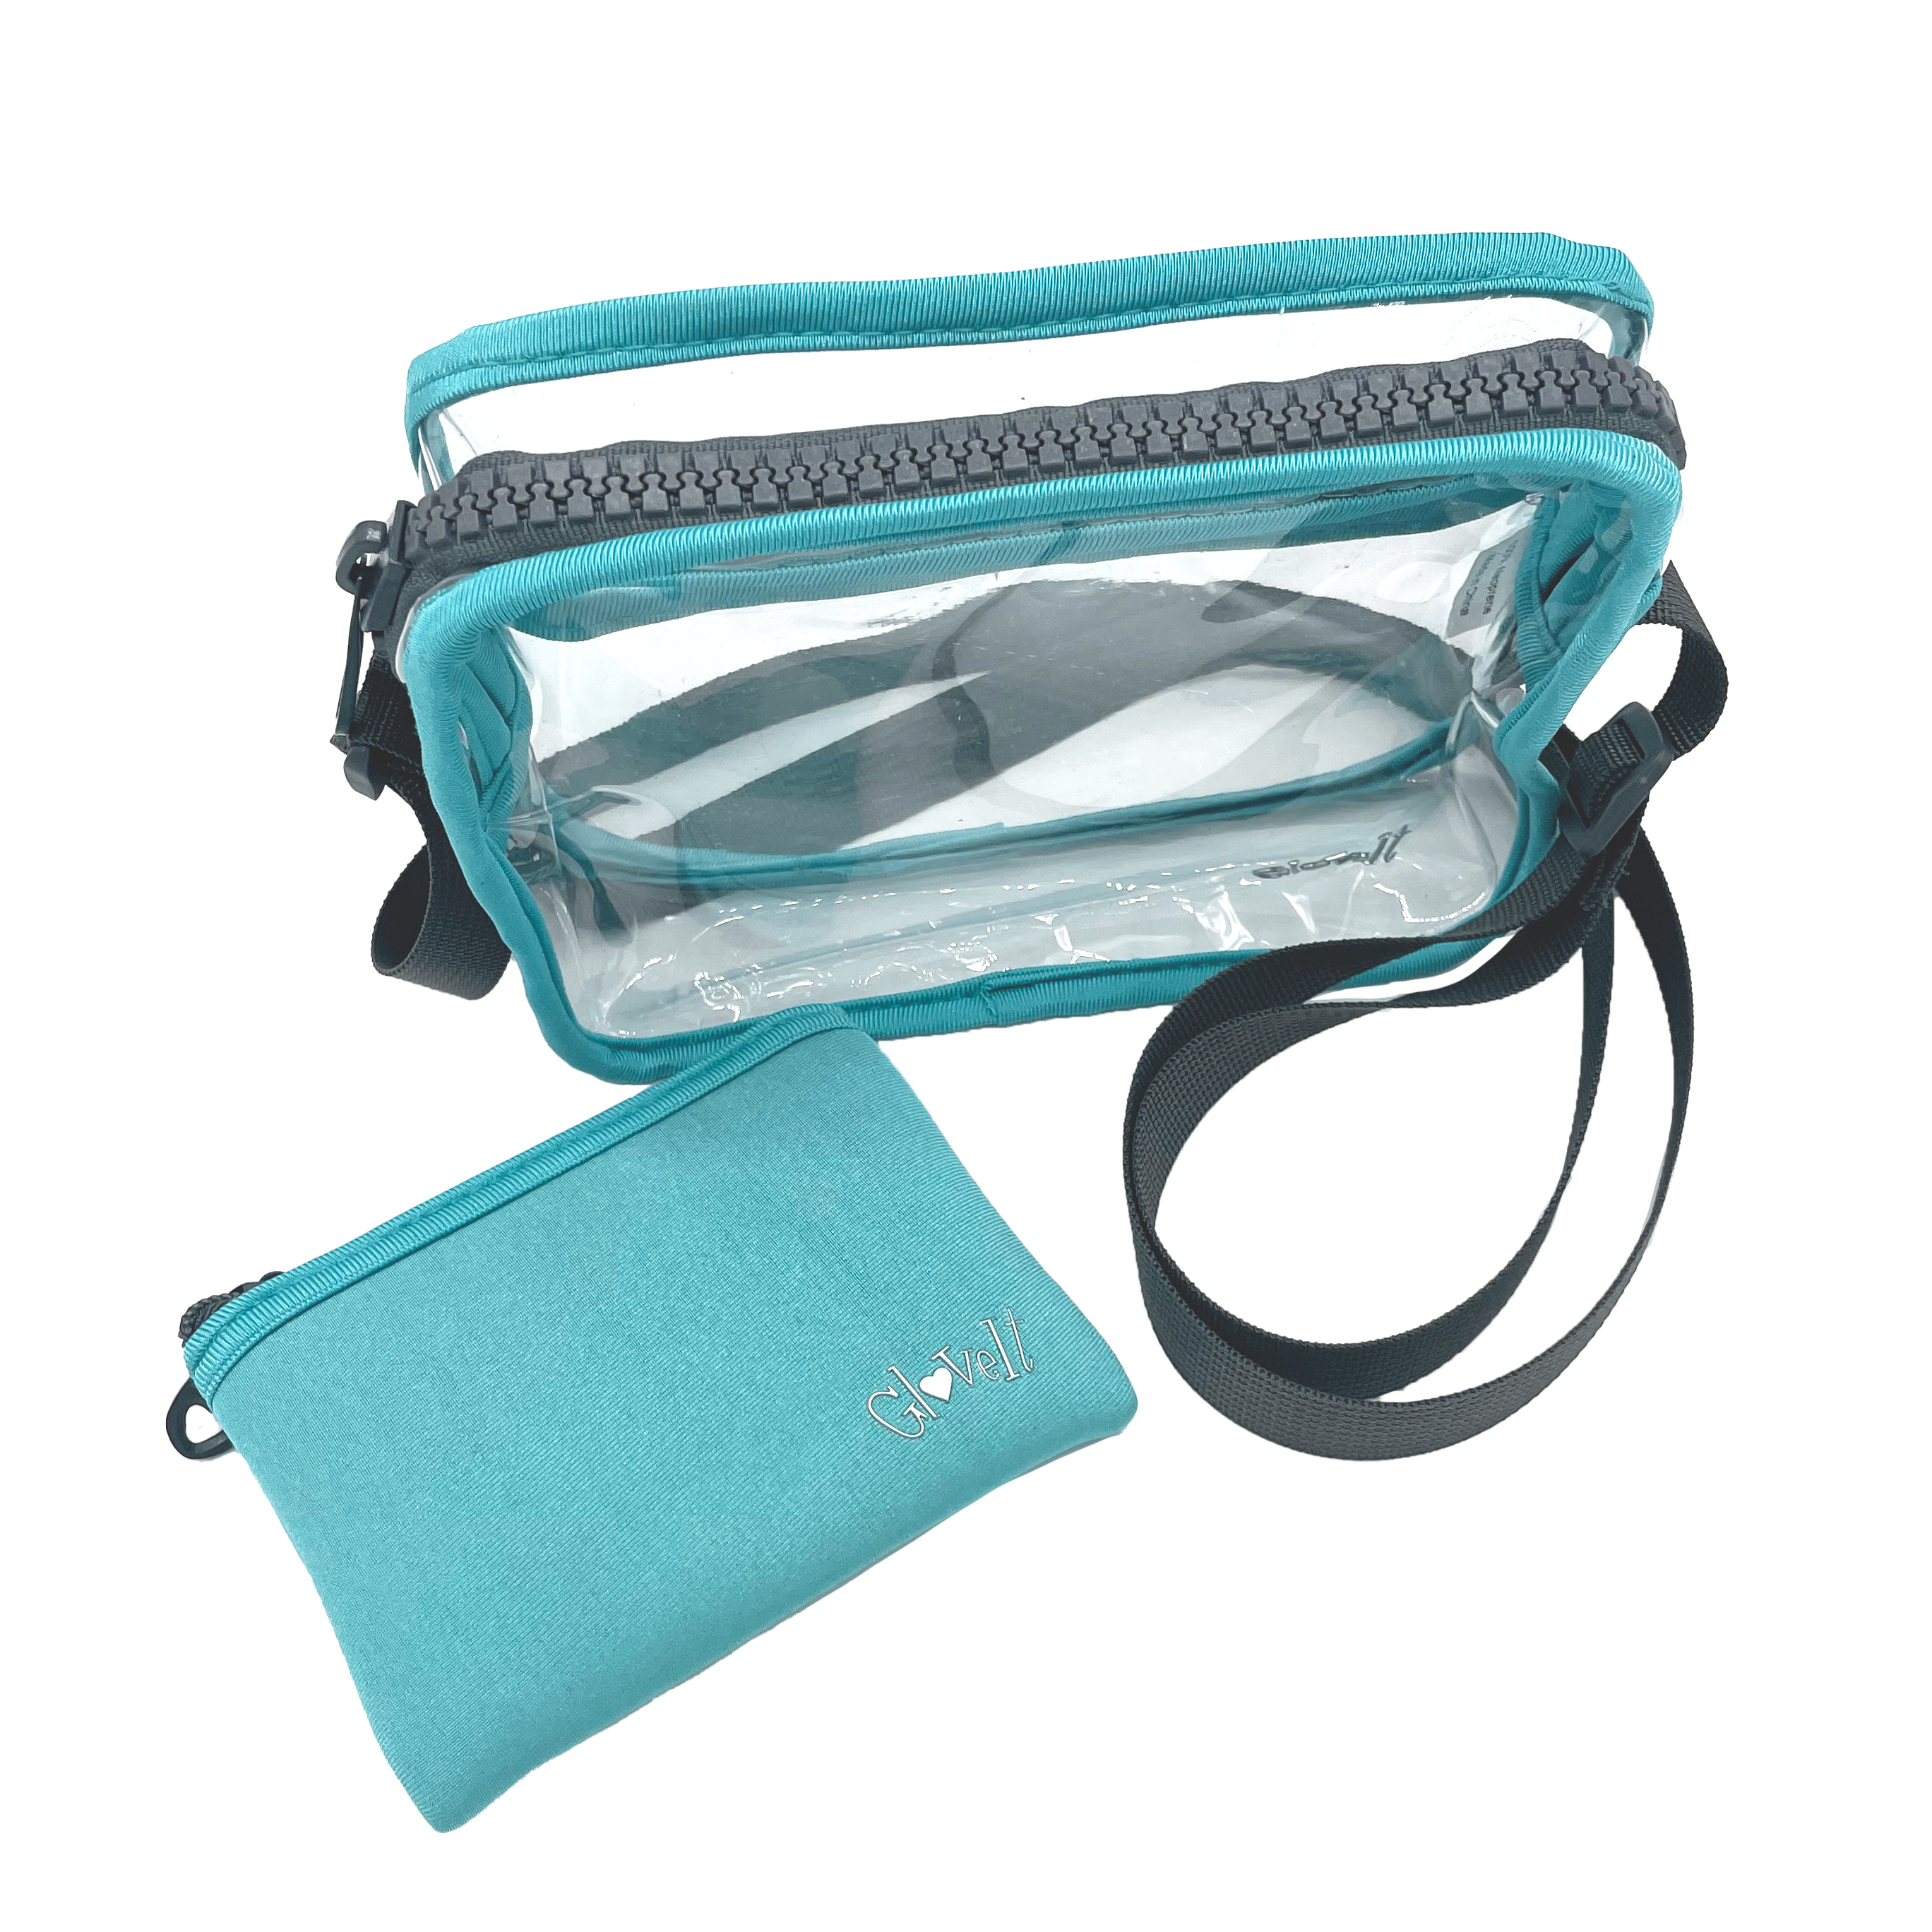 Capri Designs Clear Small Crossbody Bag, Stadium Approved with Team Logo,  NCAA Licensed, PVC Color Accents